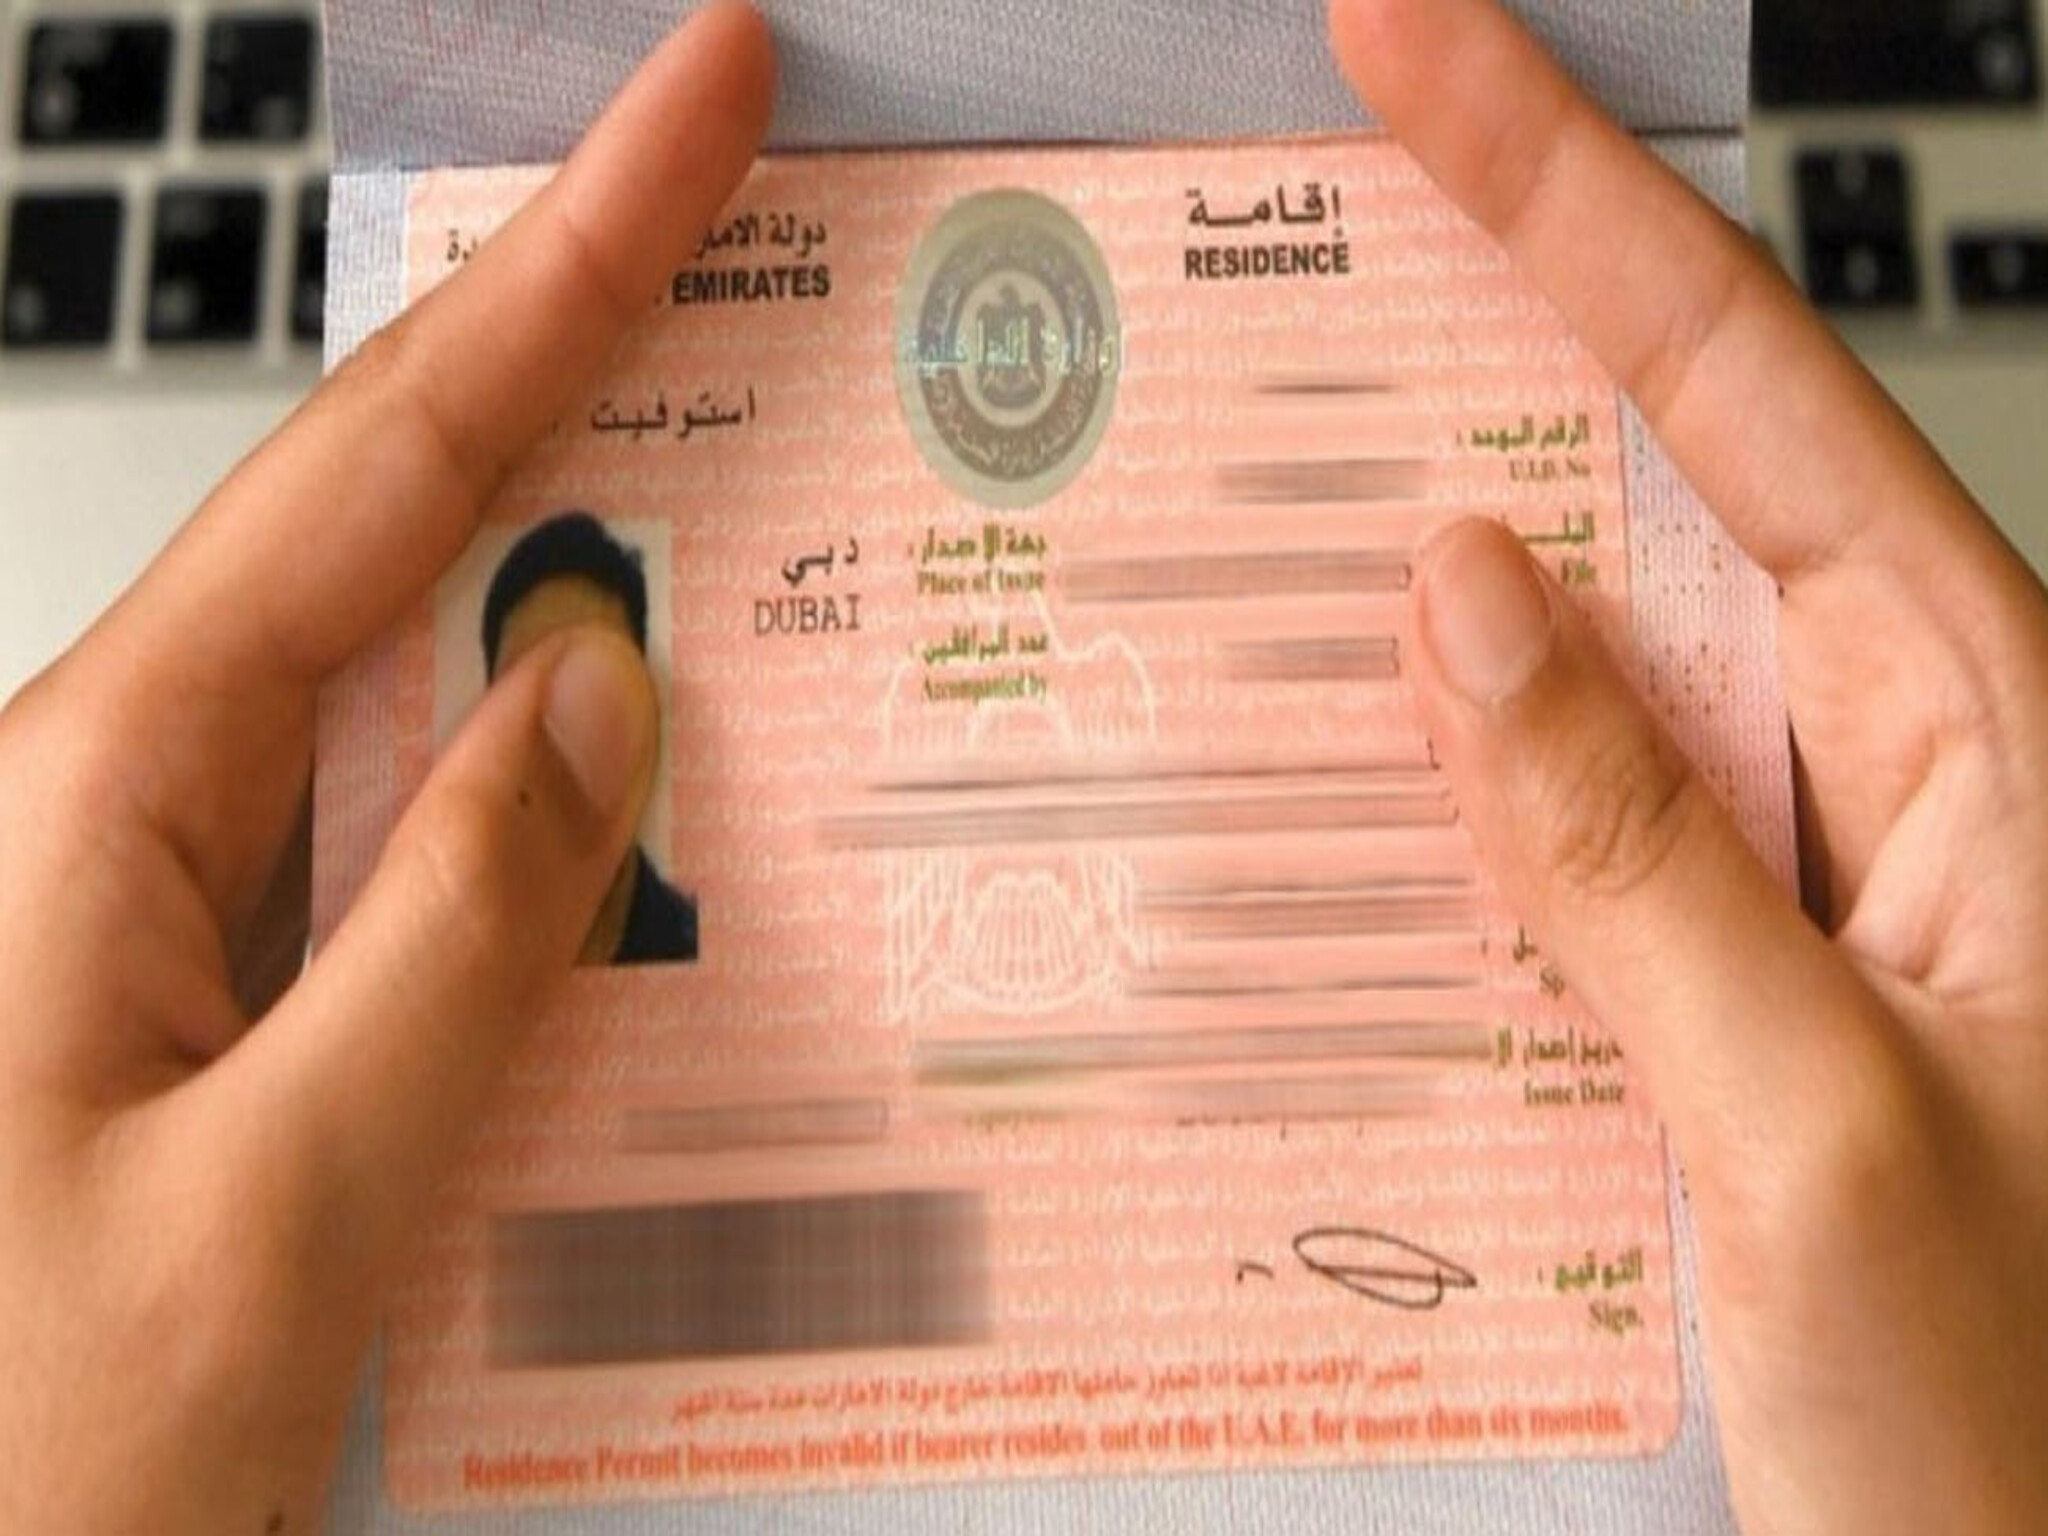 The UAE announces visa and residency fees in the country